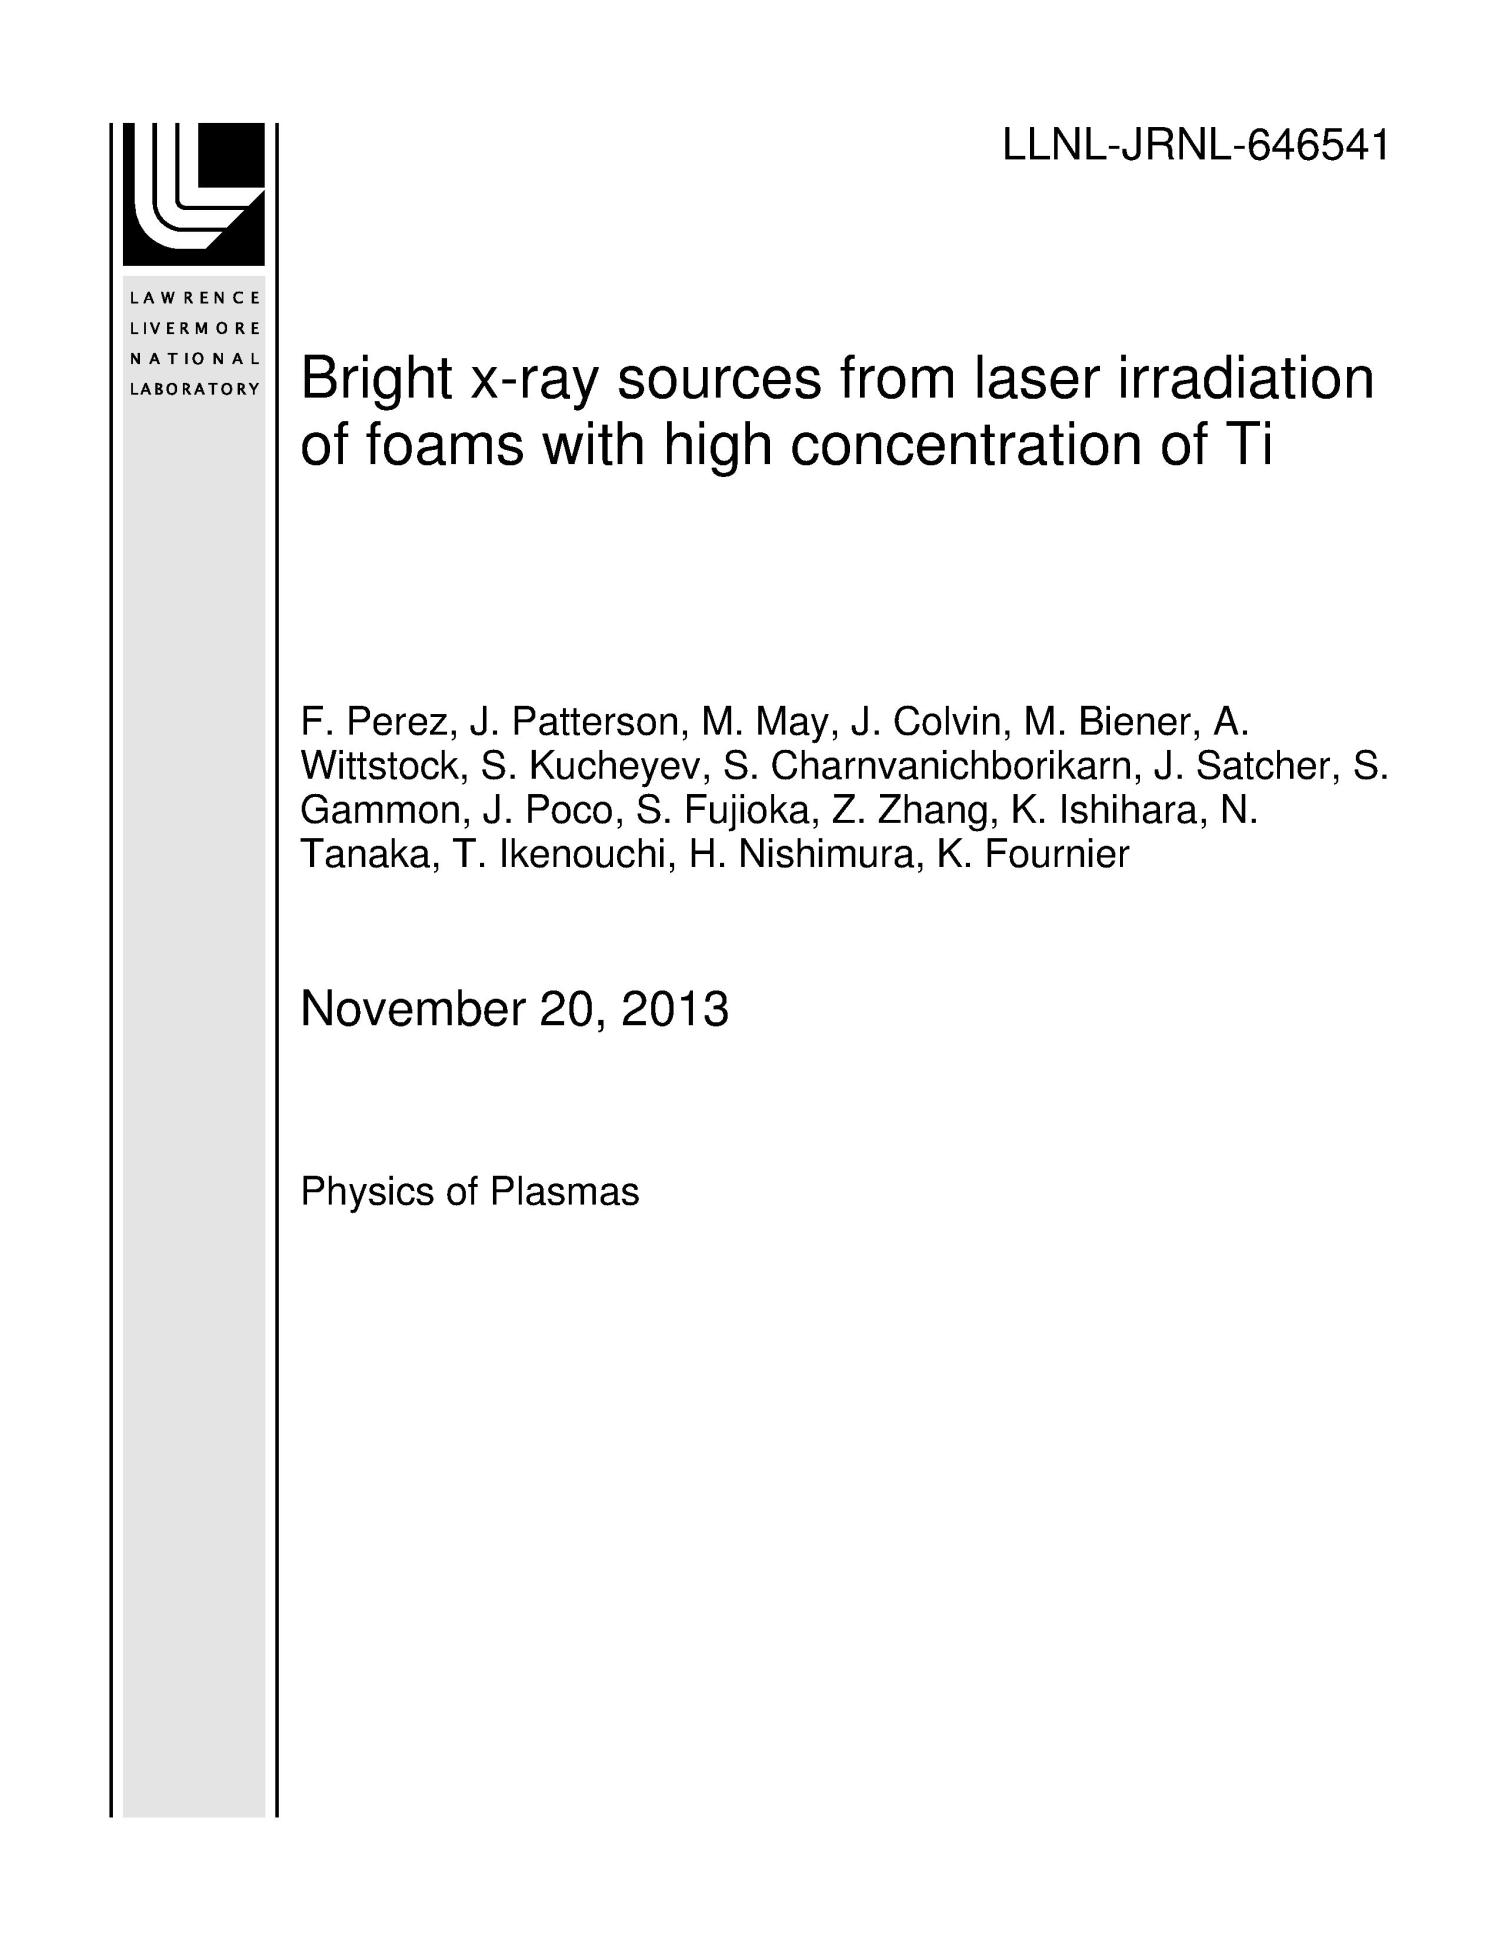 Bright x-ray sources from laser irradiation of foams with high concentration of Ti
                                                
                                                    [Sequence #]: 1 of 10
                                                